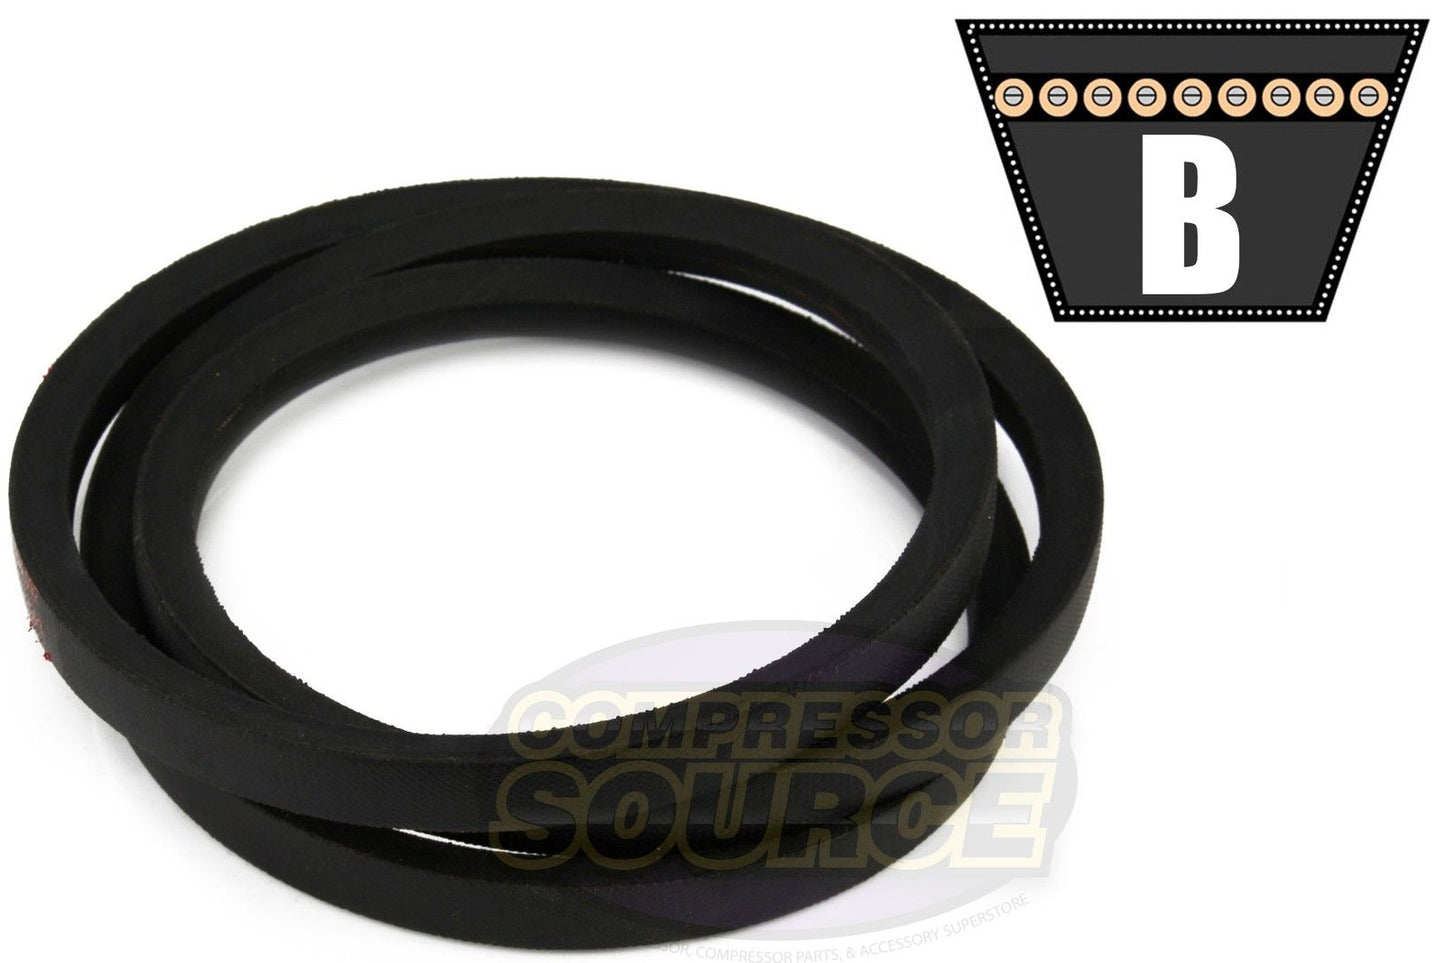 B65 Replacement High Quality Industrial & Lawn Mower 5/8" x 68"  V Belt 5L680